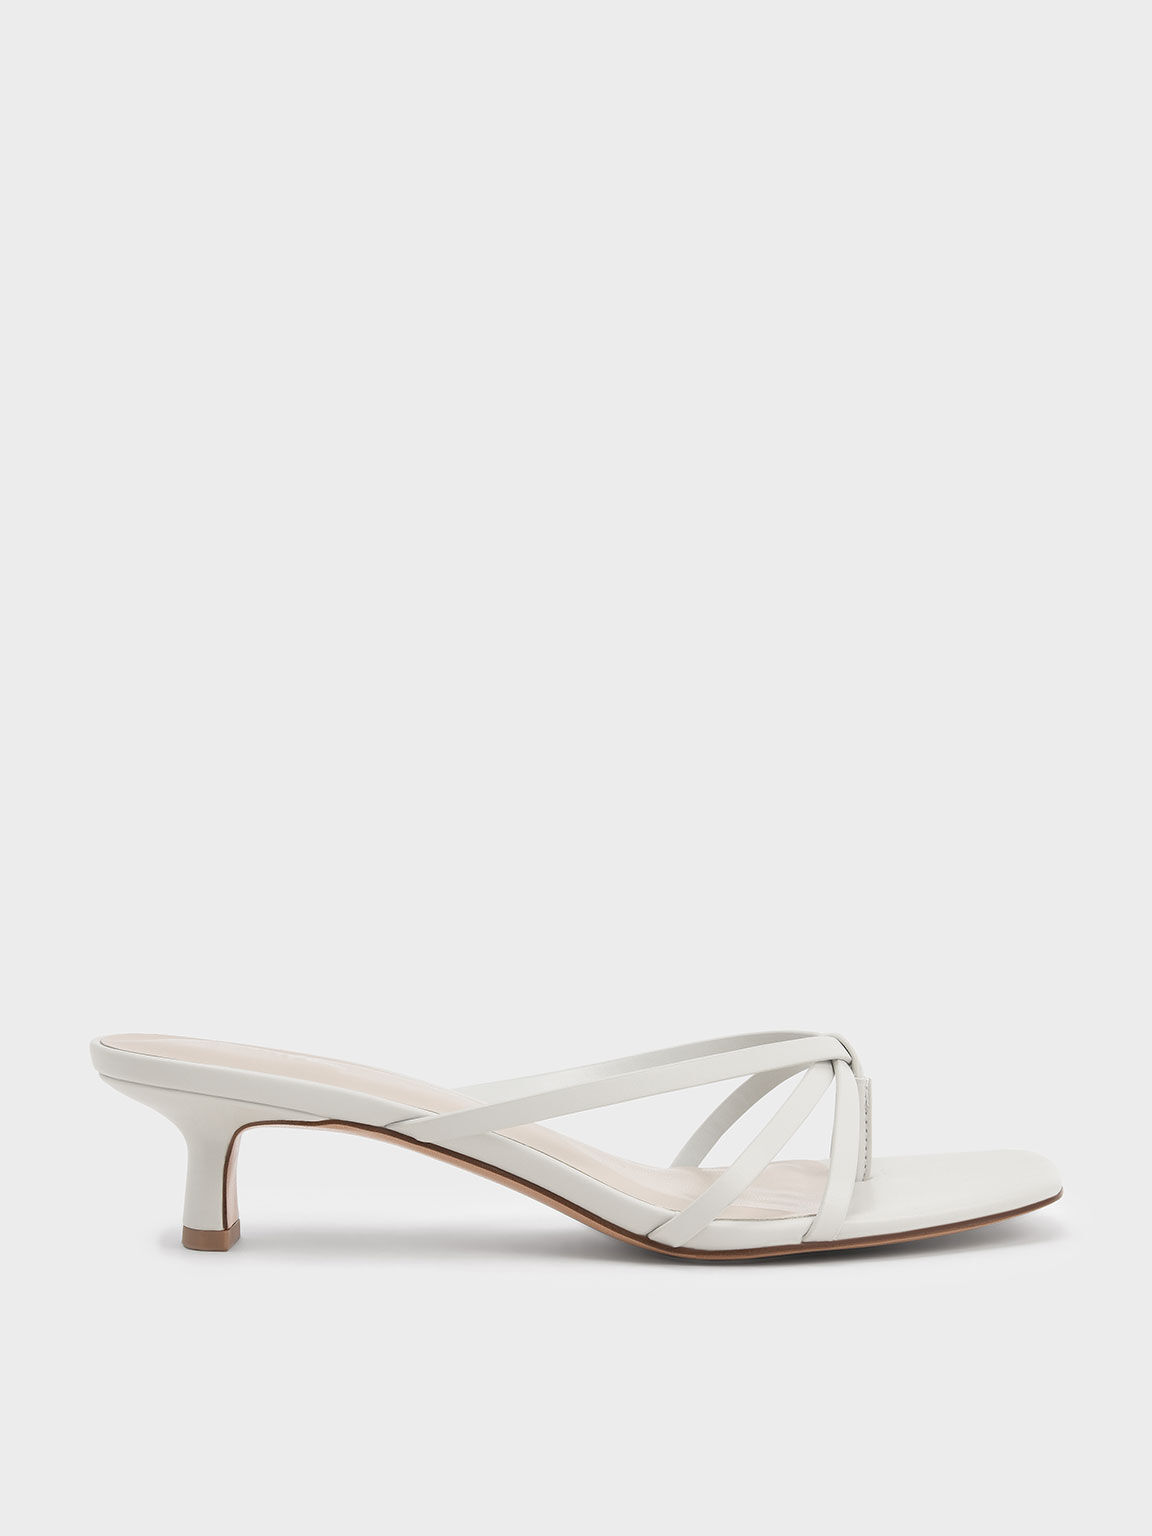 Strappy Heeled Toe-Loop Sandals, White, hi-res